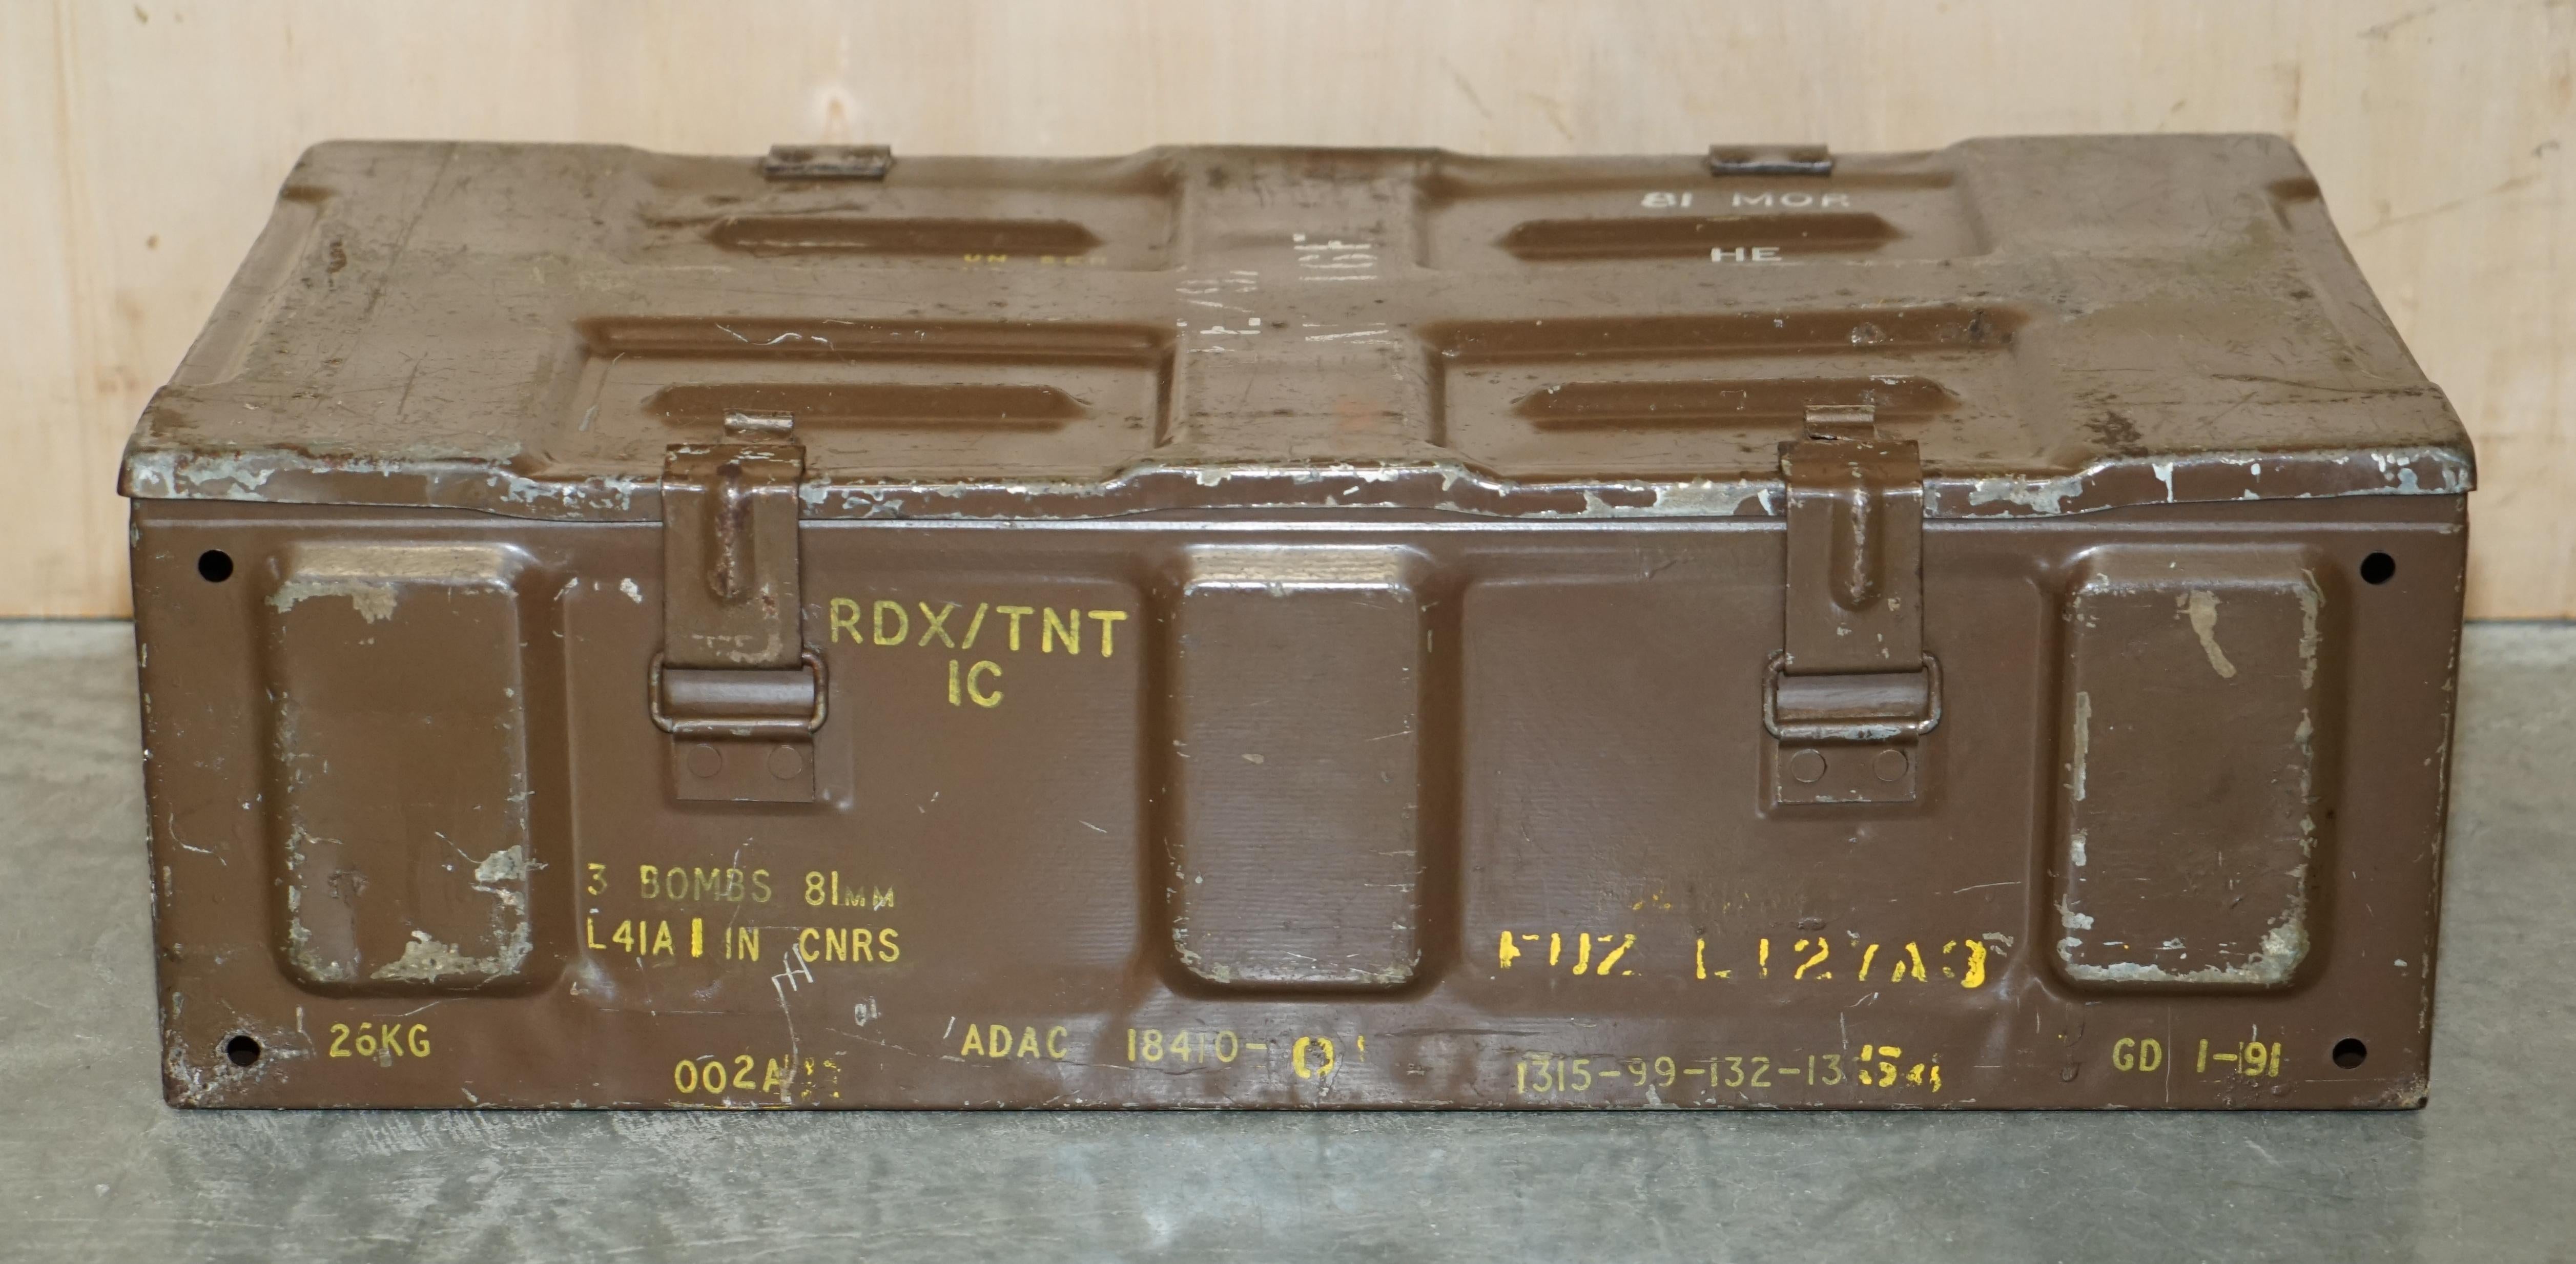 We are delighted to offer for sale this period Military Campaign used, Gulf War Bomb Ammo box with all the original patina.

I have two of these for sale, the second piece is listed under my other items.

This is a genuine campaign used piece